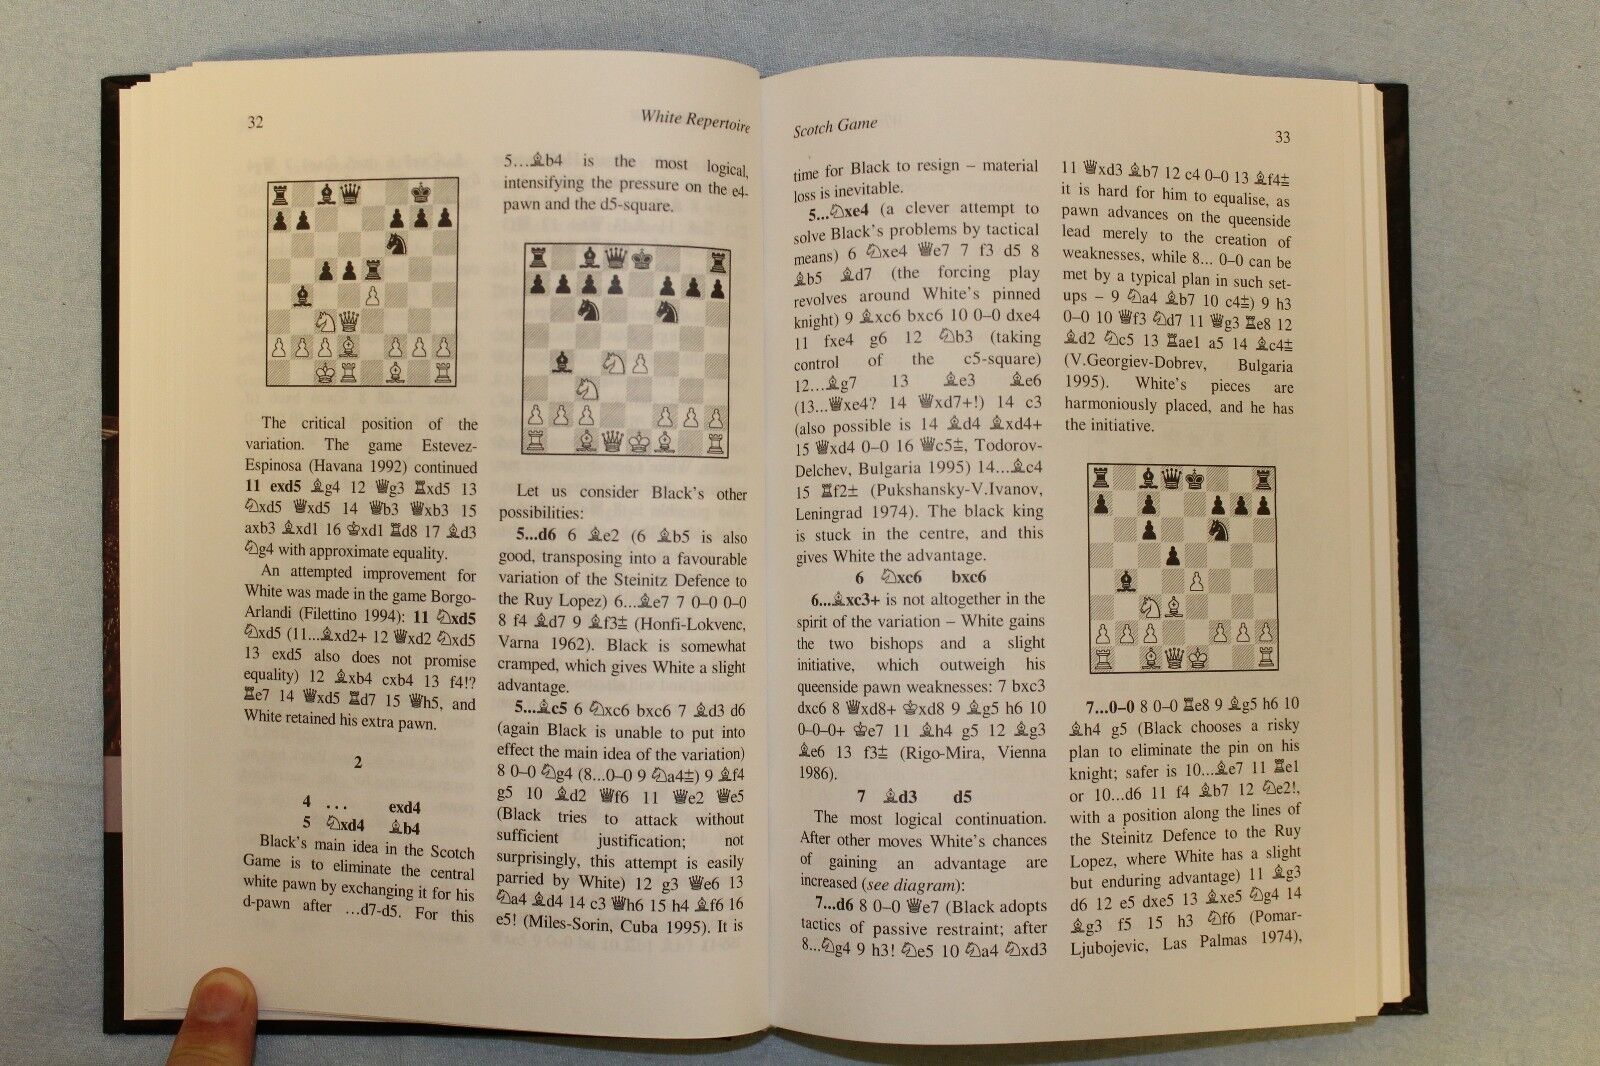 11095.Chess Book: N. Kalinichenko. A Positional Opening Repertoire for the Club Player